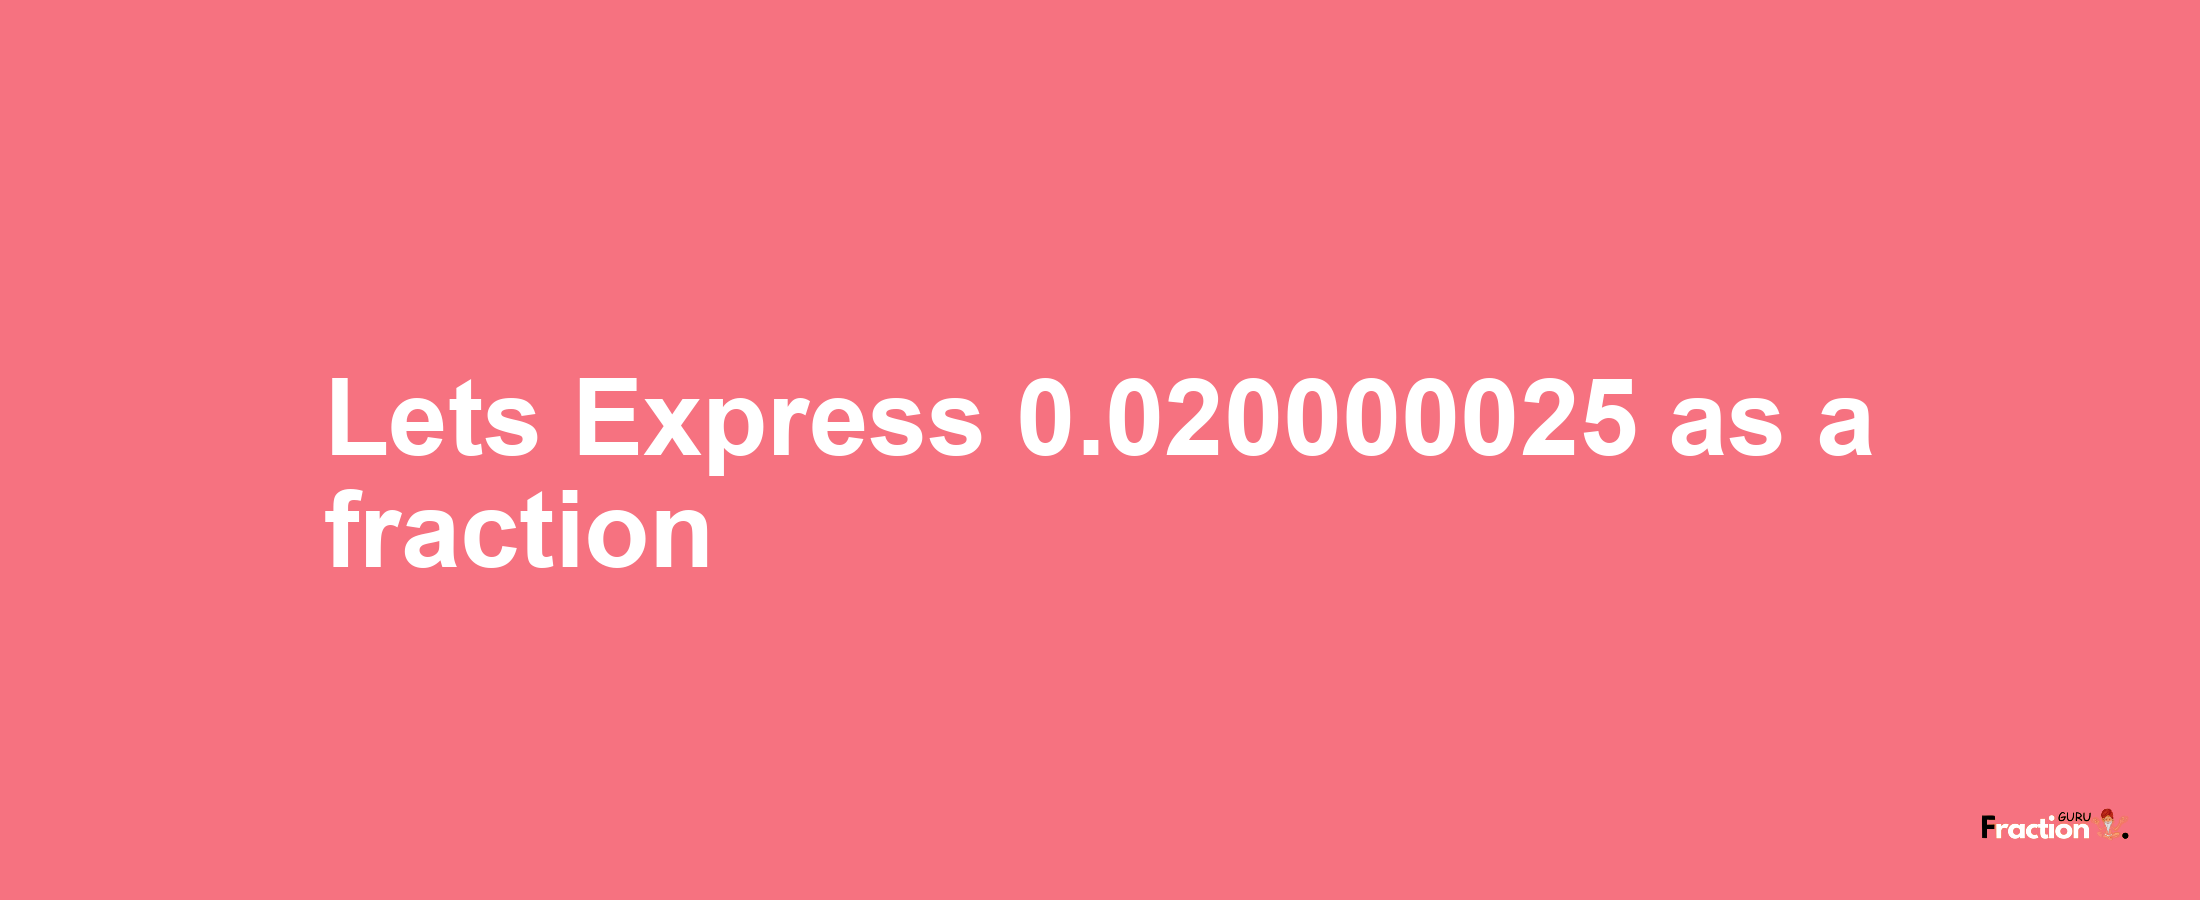 Lets Express 0.020000025 as afraction